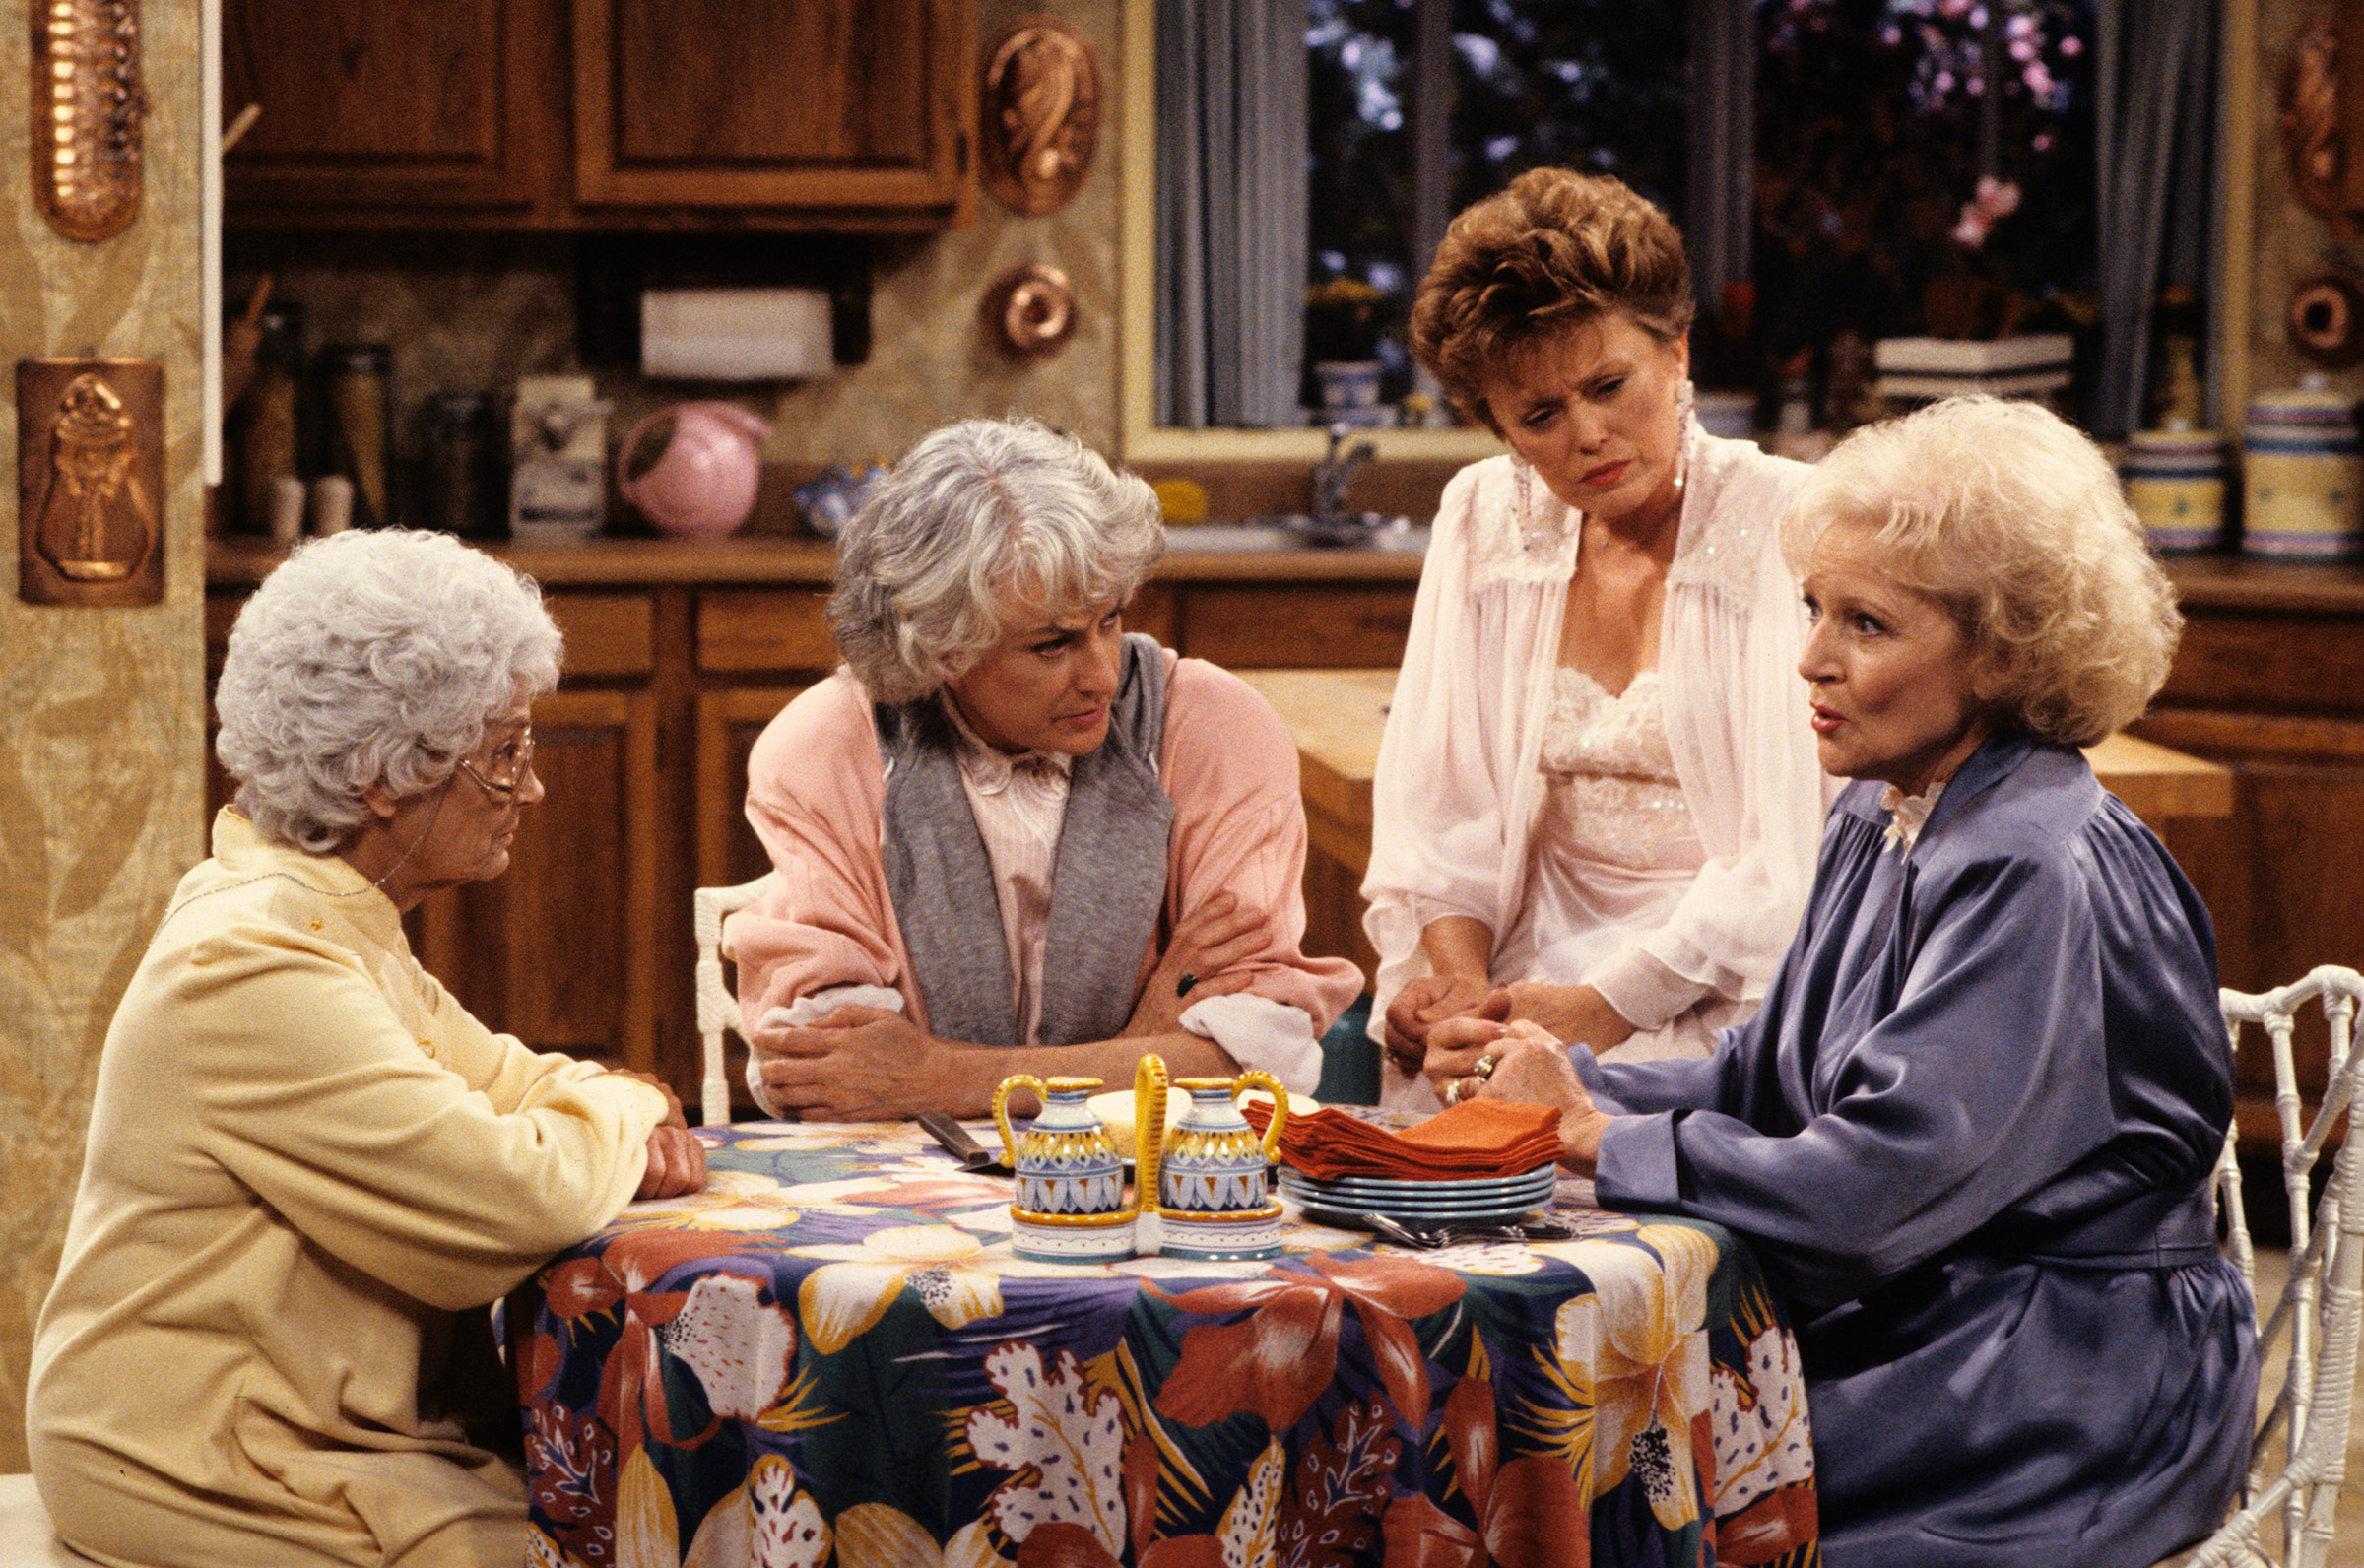 From left, Estelle Getty as Sophia Petrillo, Bea Arthur as Dorothy Petrillo Zbornak, Rue McClanahan as Blanche Devereaux and Betty White as Rose Nylund on The Golden Girls.